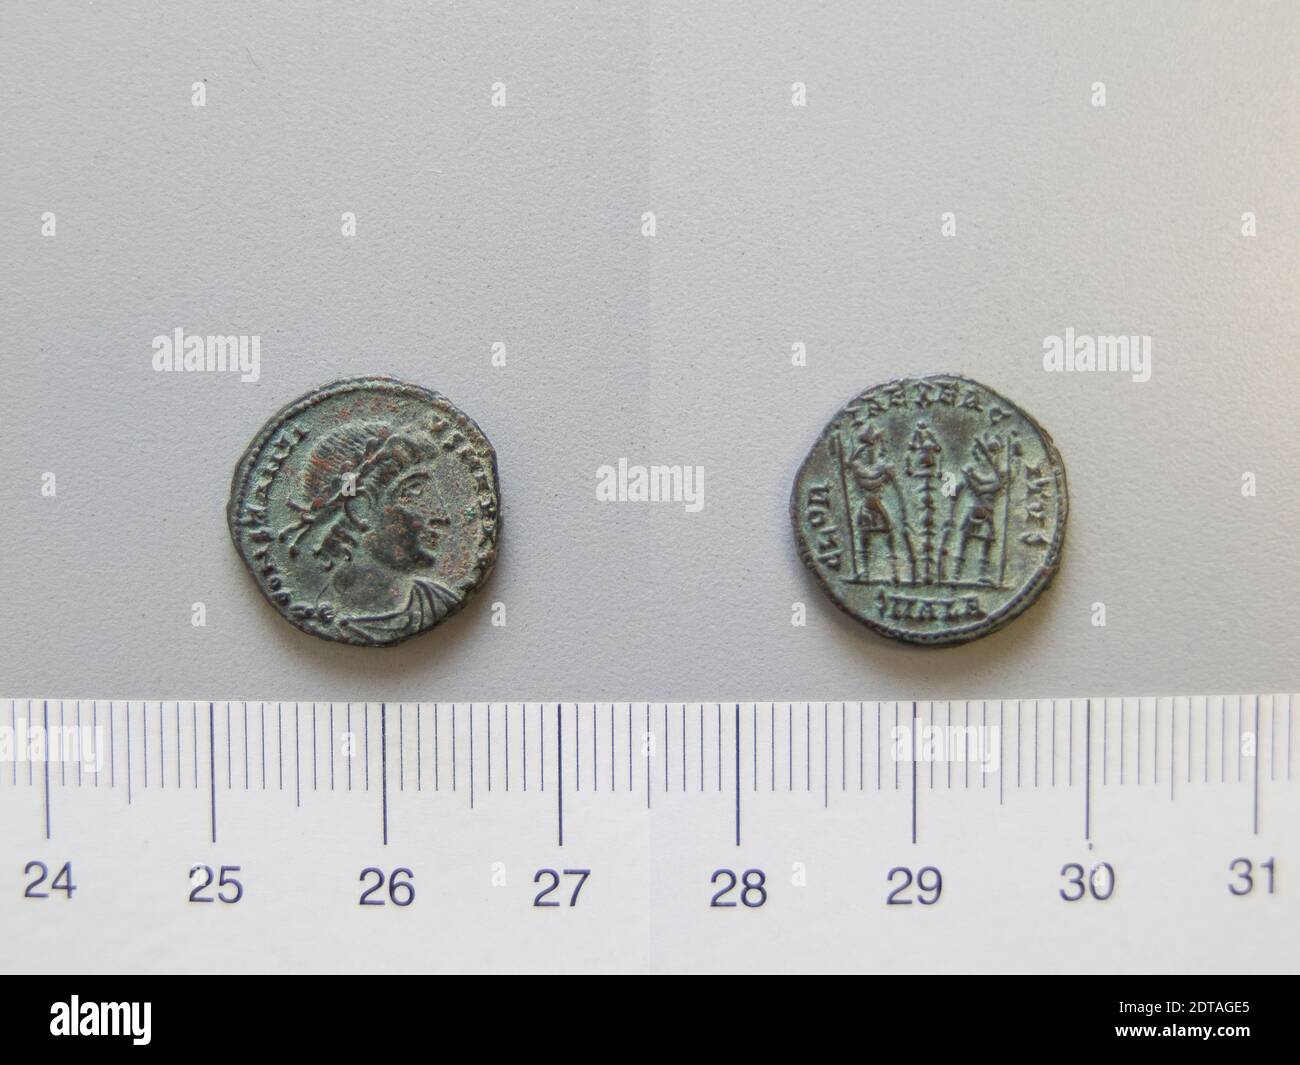 Ruler: Constantine I, Emperor of Rome, A.D. 285–337, ruled A.D. 306–337, Mint: Alexandria, Honorand: Constantine II, Emperor of Rome, A.D. 316–340, 1 Nummus of Constantine I, Emperor of Rome from Alexandria, 335–37, Argentiferous bronze, 2.01 g, 6:00, 15.7 mm, Made in Alexandria, Egypt, Roman, 4th century, Numismatics Stock Photo